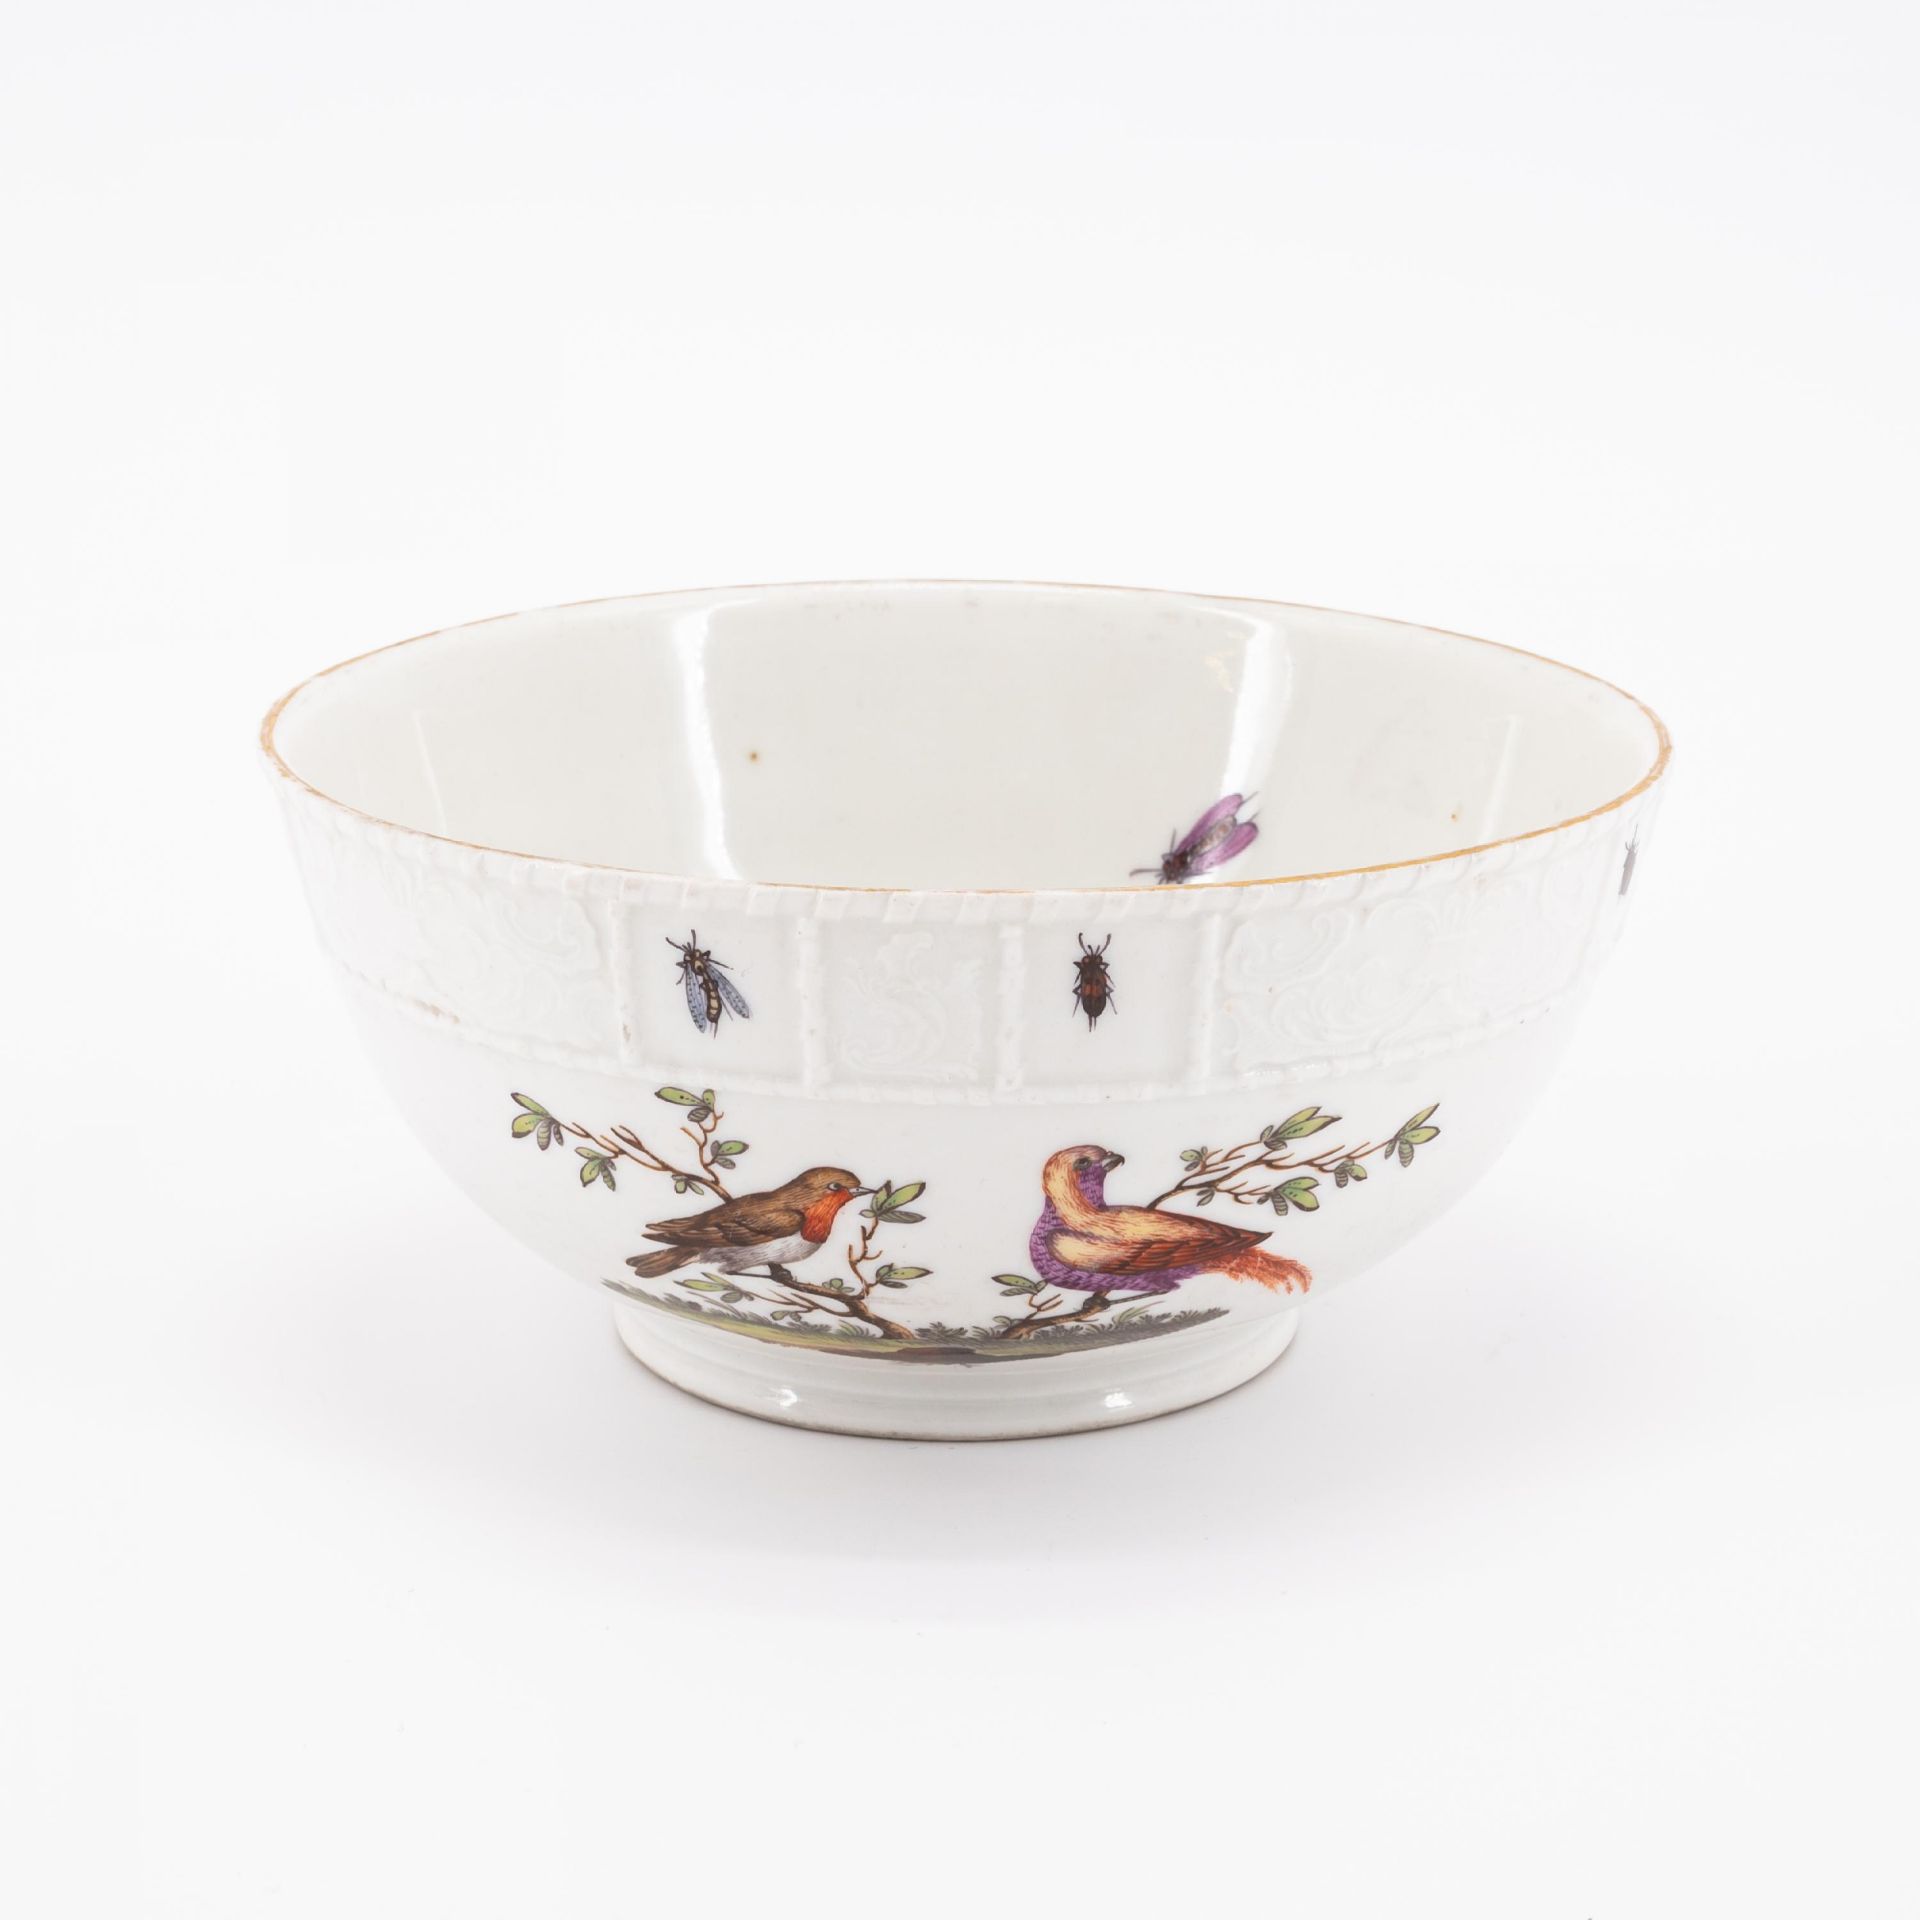 PORCELAIN SLOP BOWL, THREE CUPS AND SAUCERS WITH FIGURATIVE AND FLORAL DECOR - Image 19 of 22